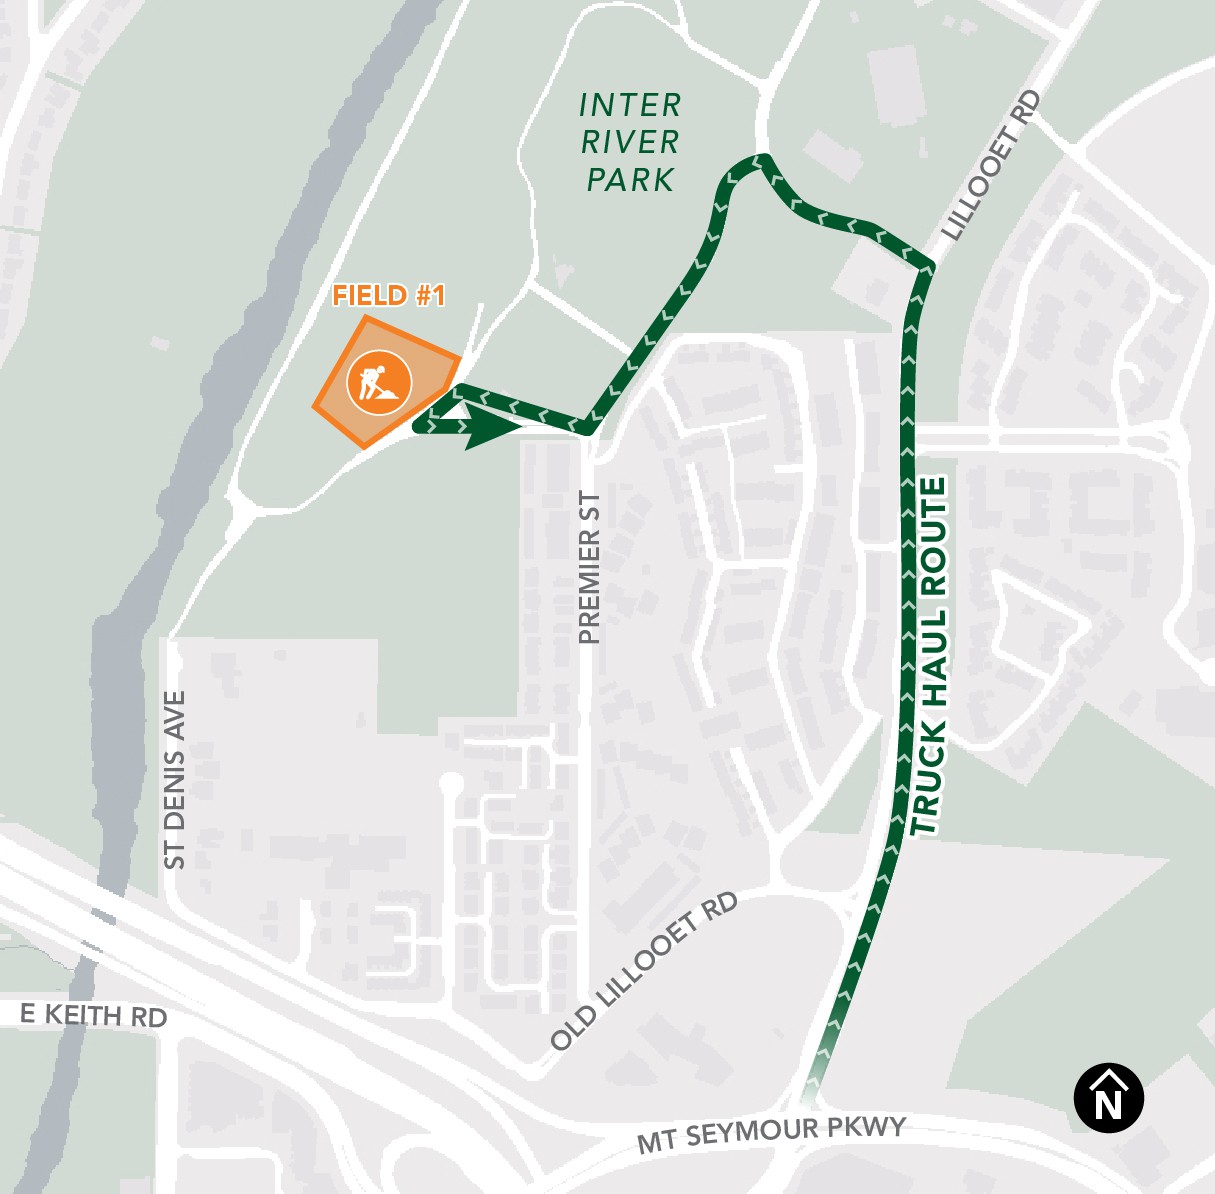 A map of the construction area for a new field at Inter River Park and the route trucks will take to haul away preload material along Lillooet Road. Text on the map notes that no construction vehicles are permitted on Premier Street. 